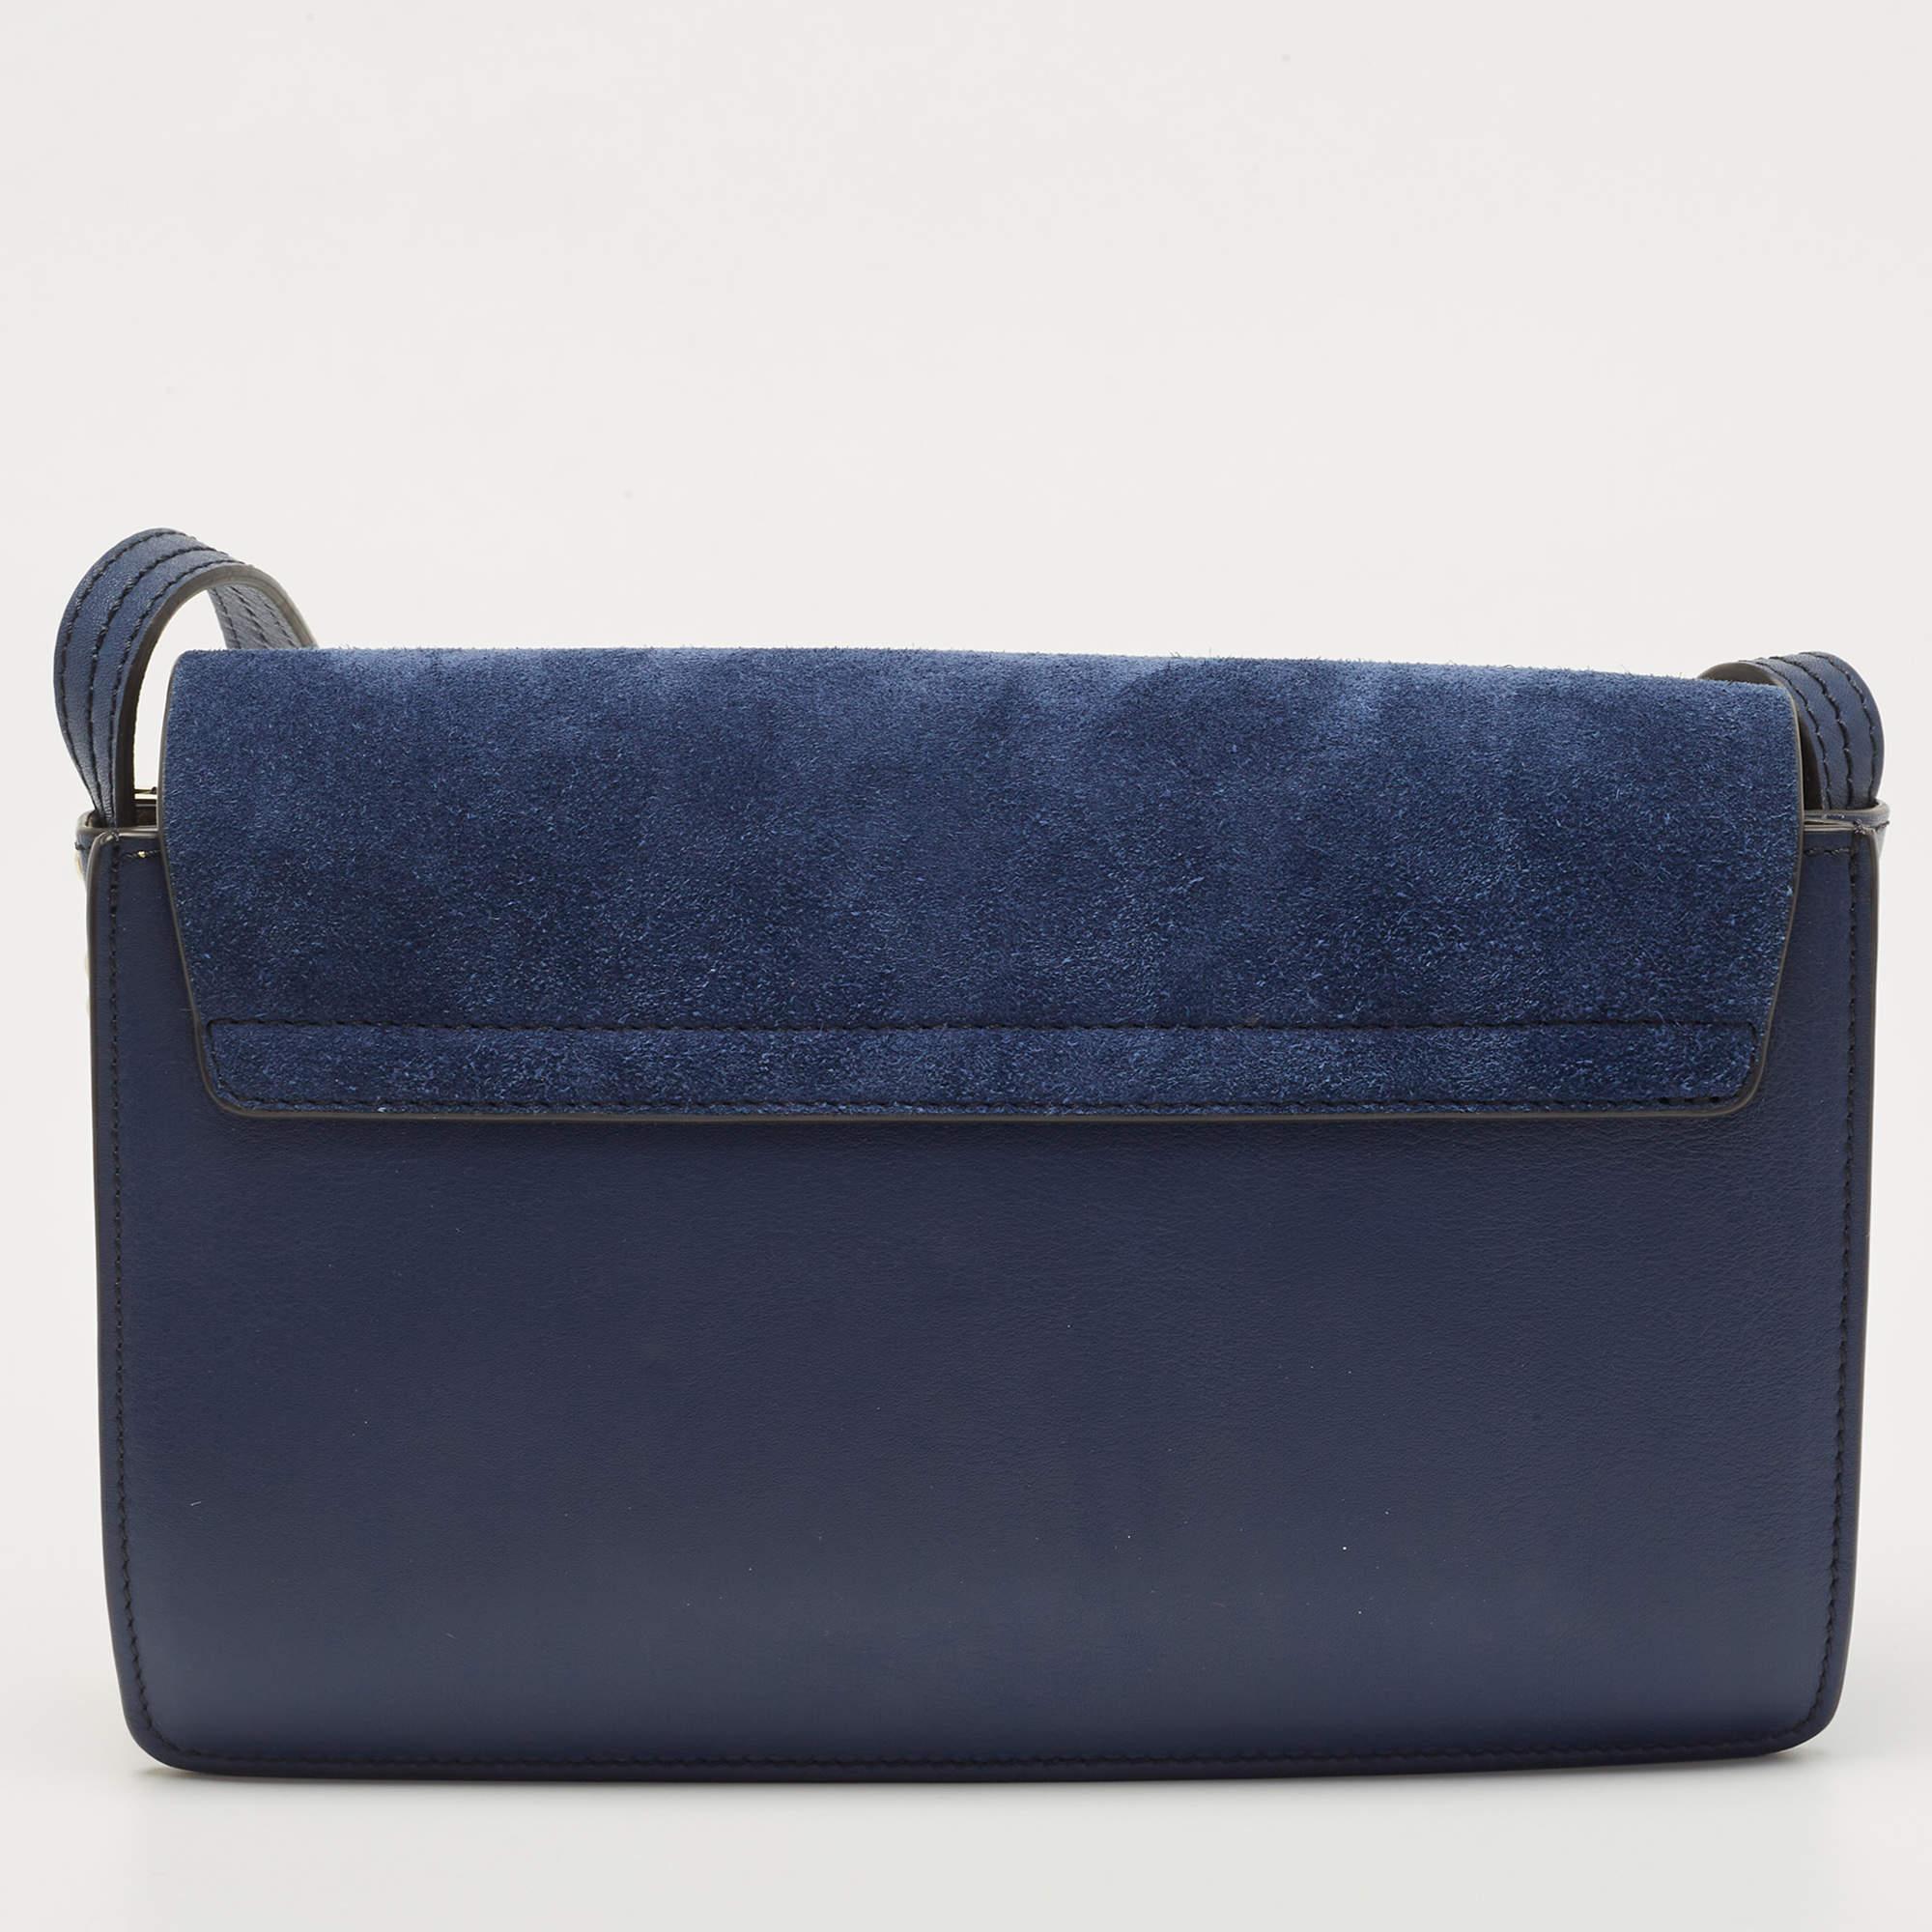 Chloe Navy Blue Leather and Suede Small Faye Shoulder Bag 8